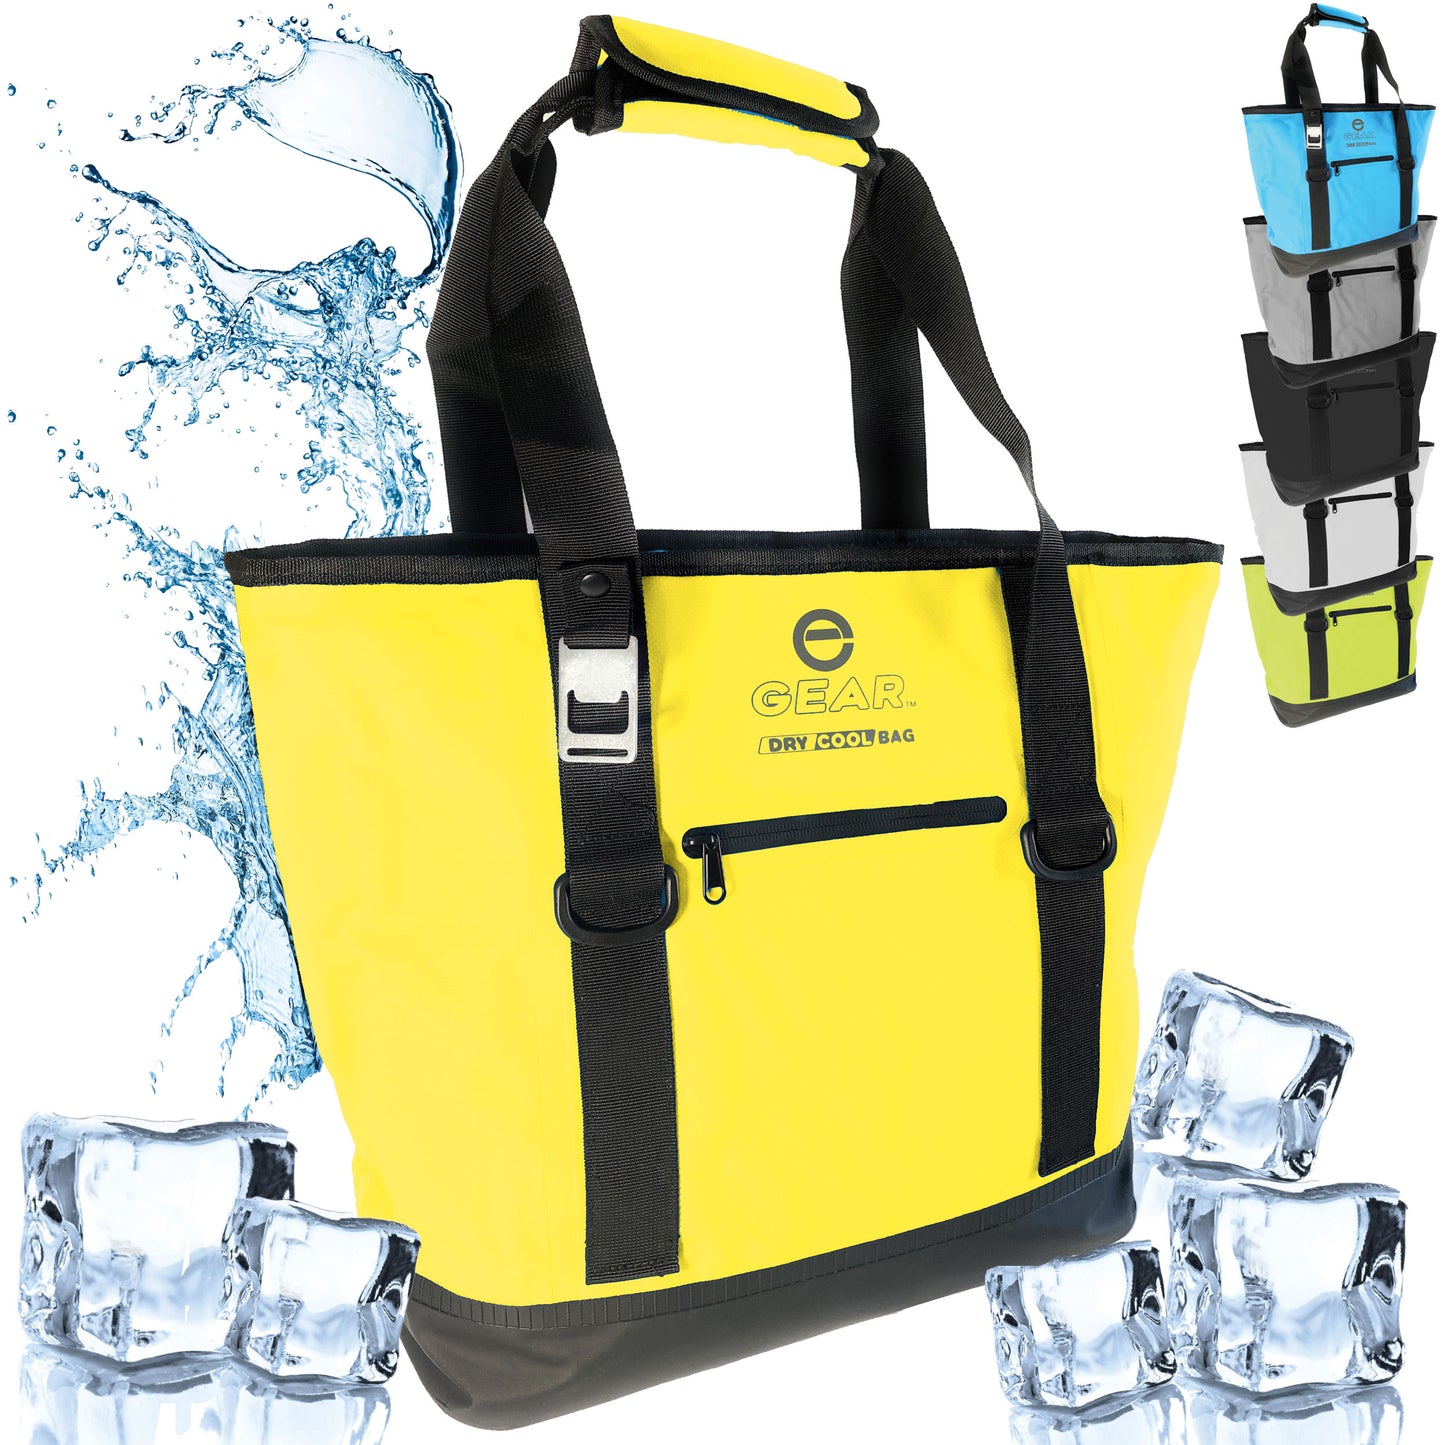 Enthusiast Gear Dry Bag Cooler Tote – Collapsible, waterproof, with Side Pocket - Perfect for Pool, Beach, Picnics, Grocery - 20 Cans